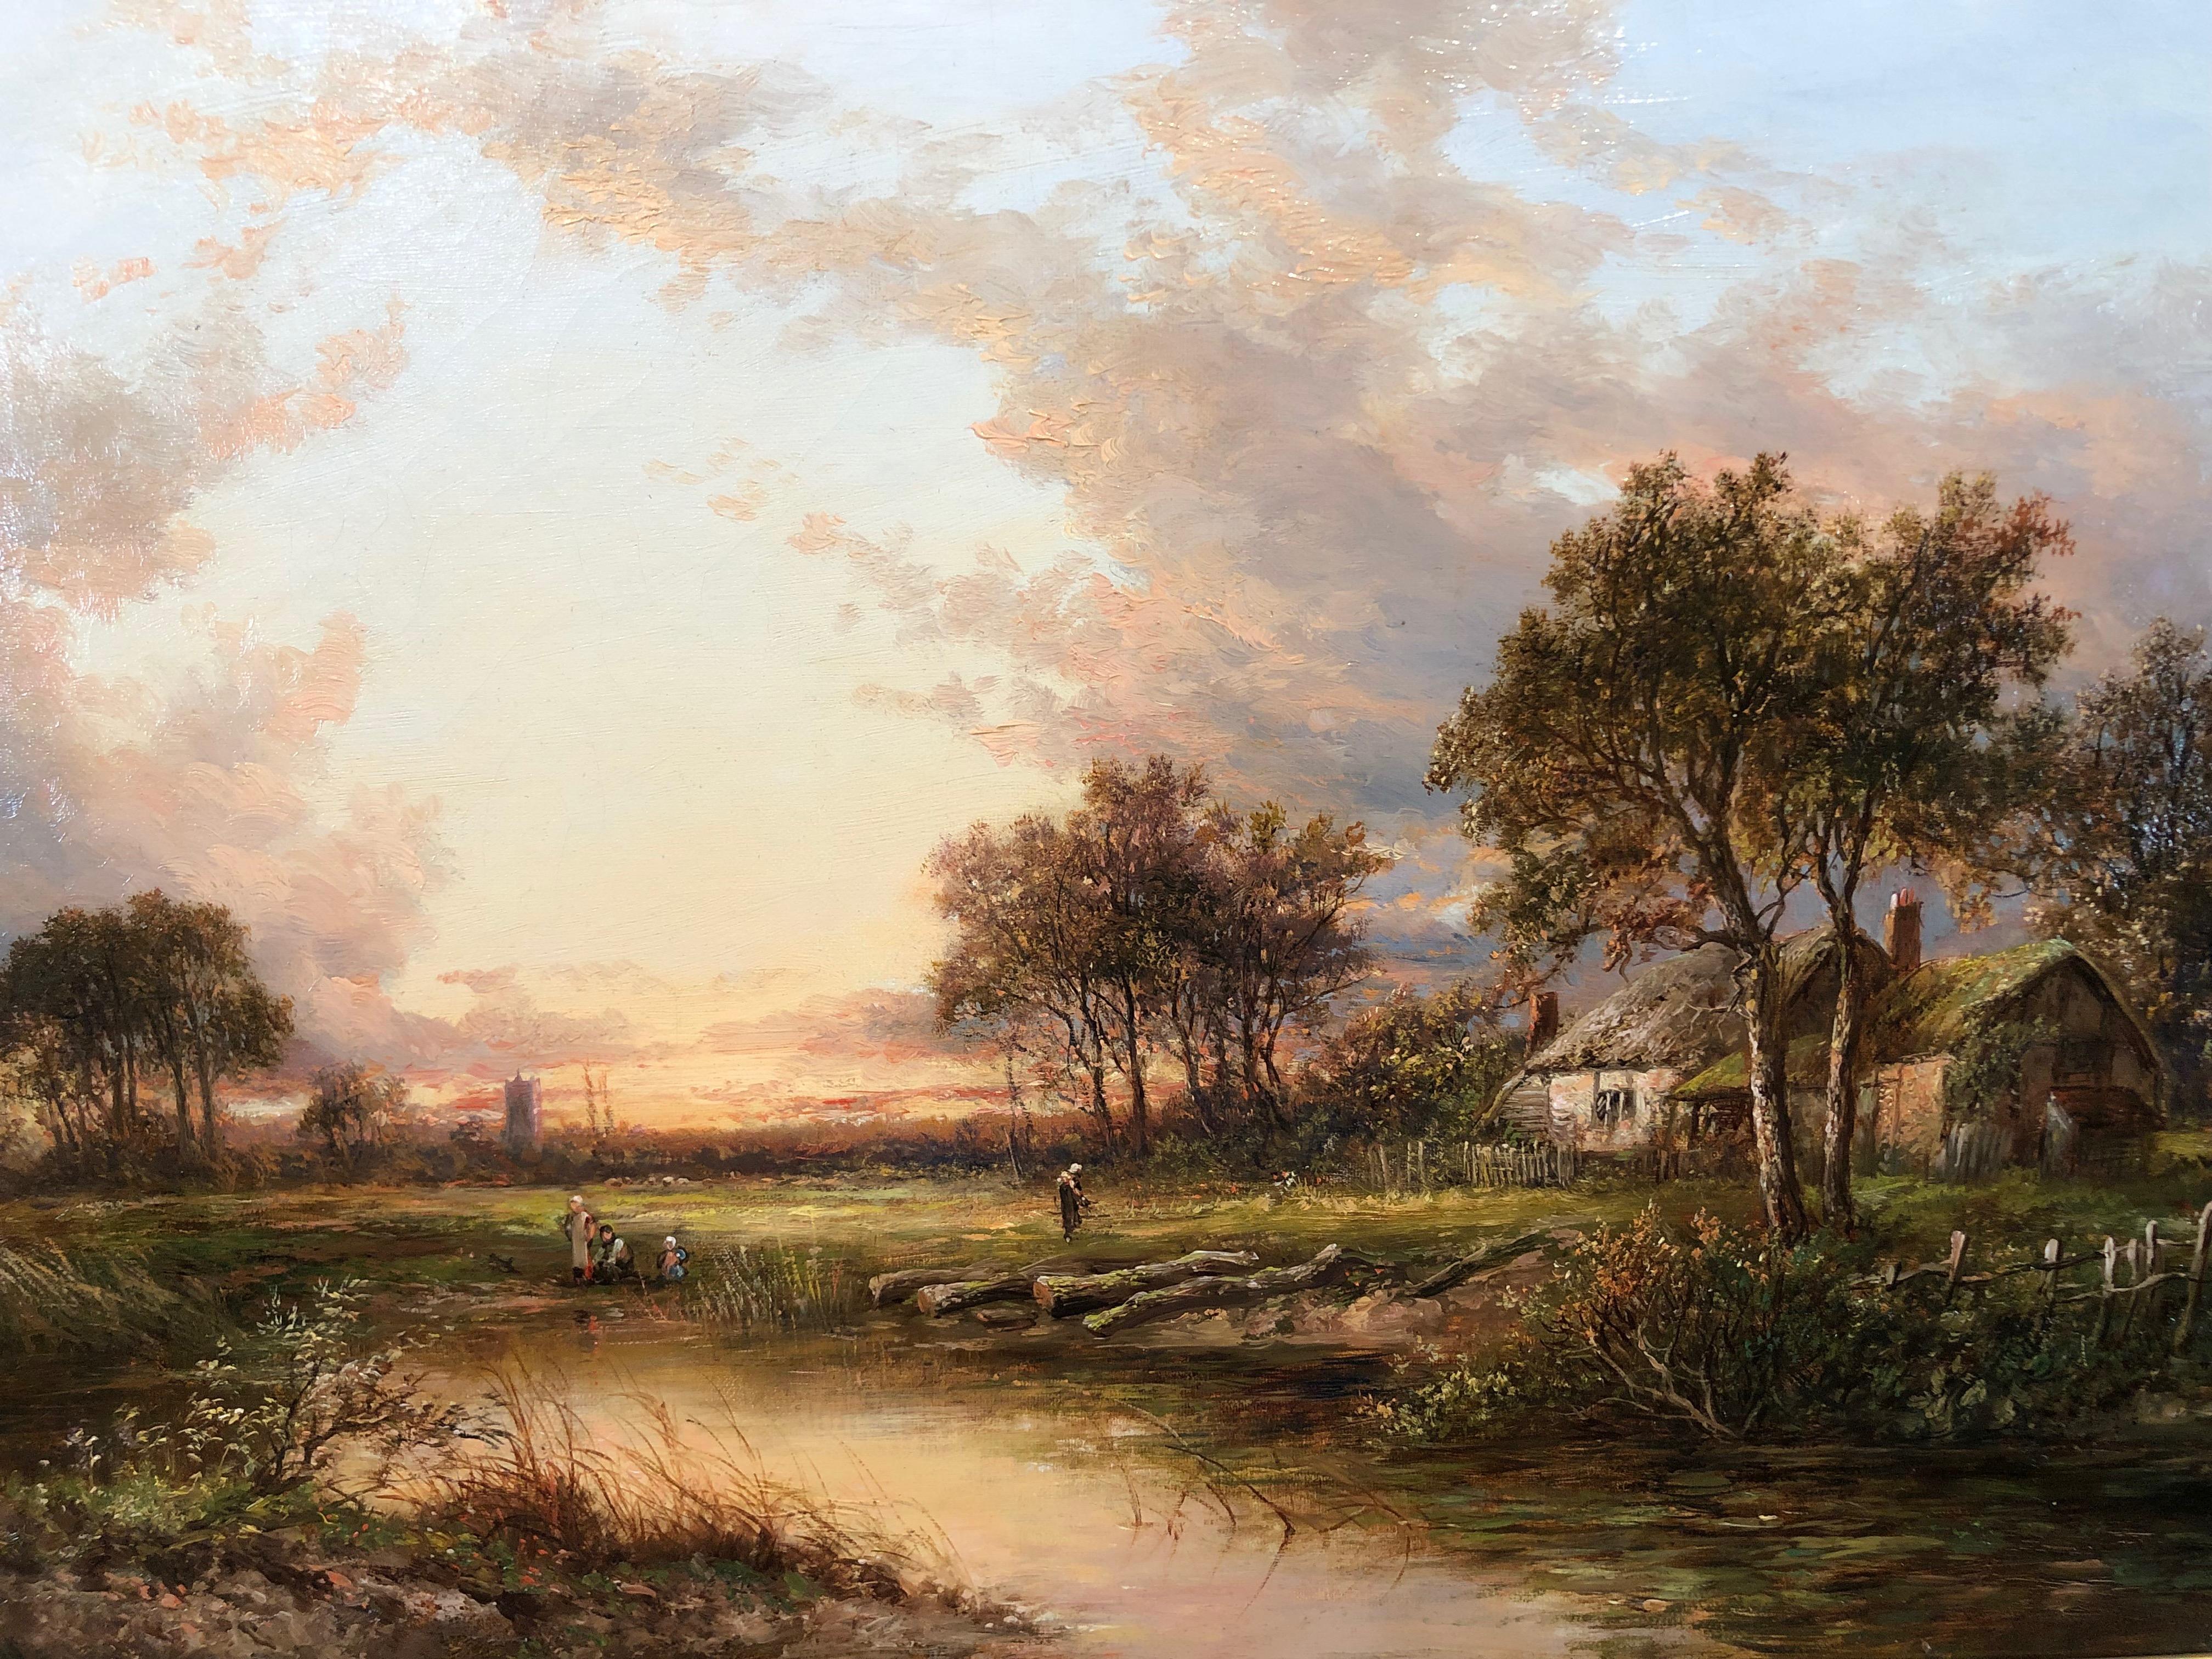 Evening By The River - Oil On Canvas, Landscape by Joseph Thors 1